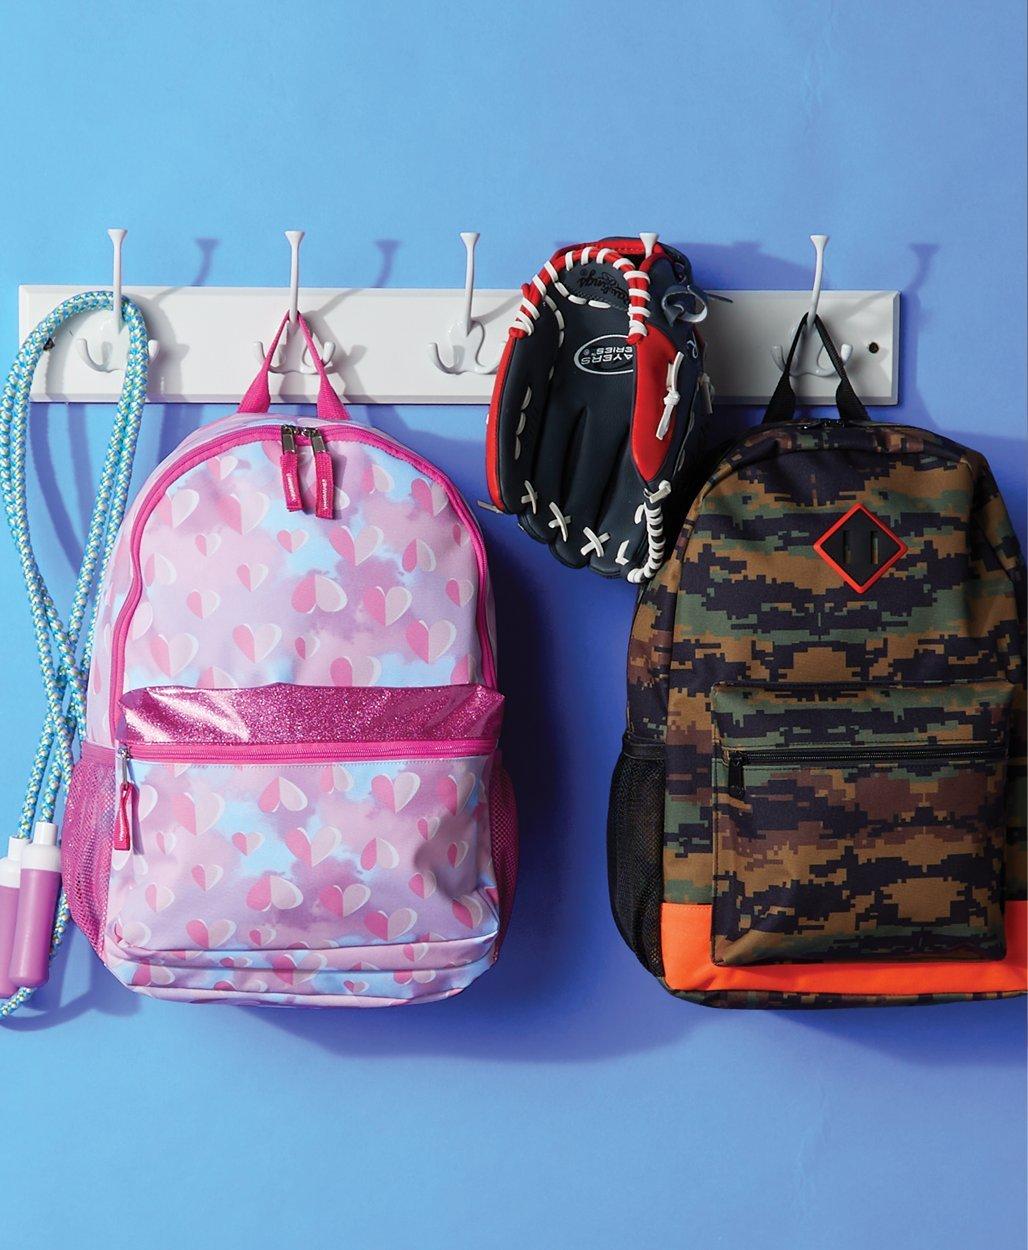 Backpacks & lunch totes